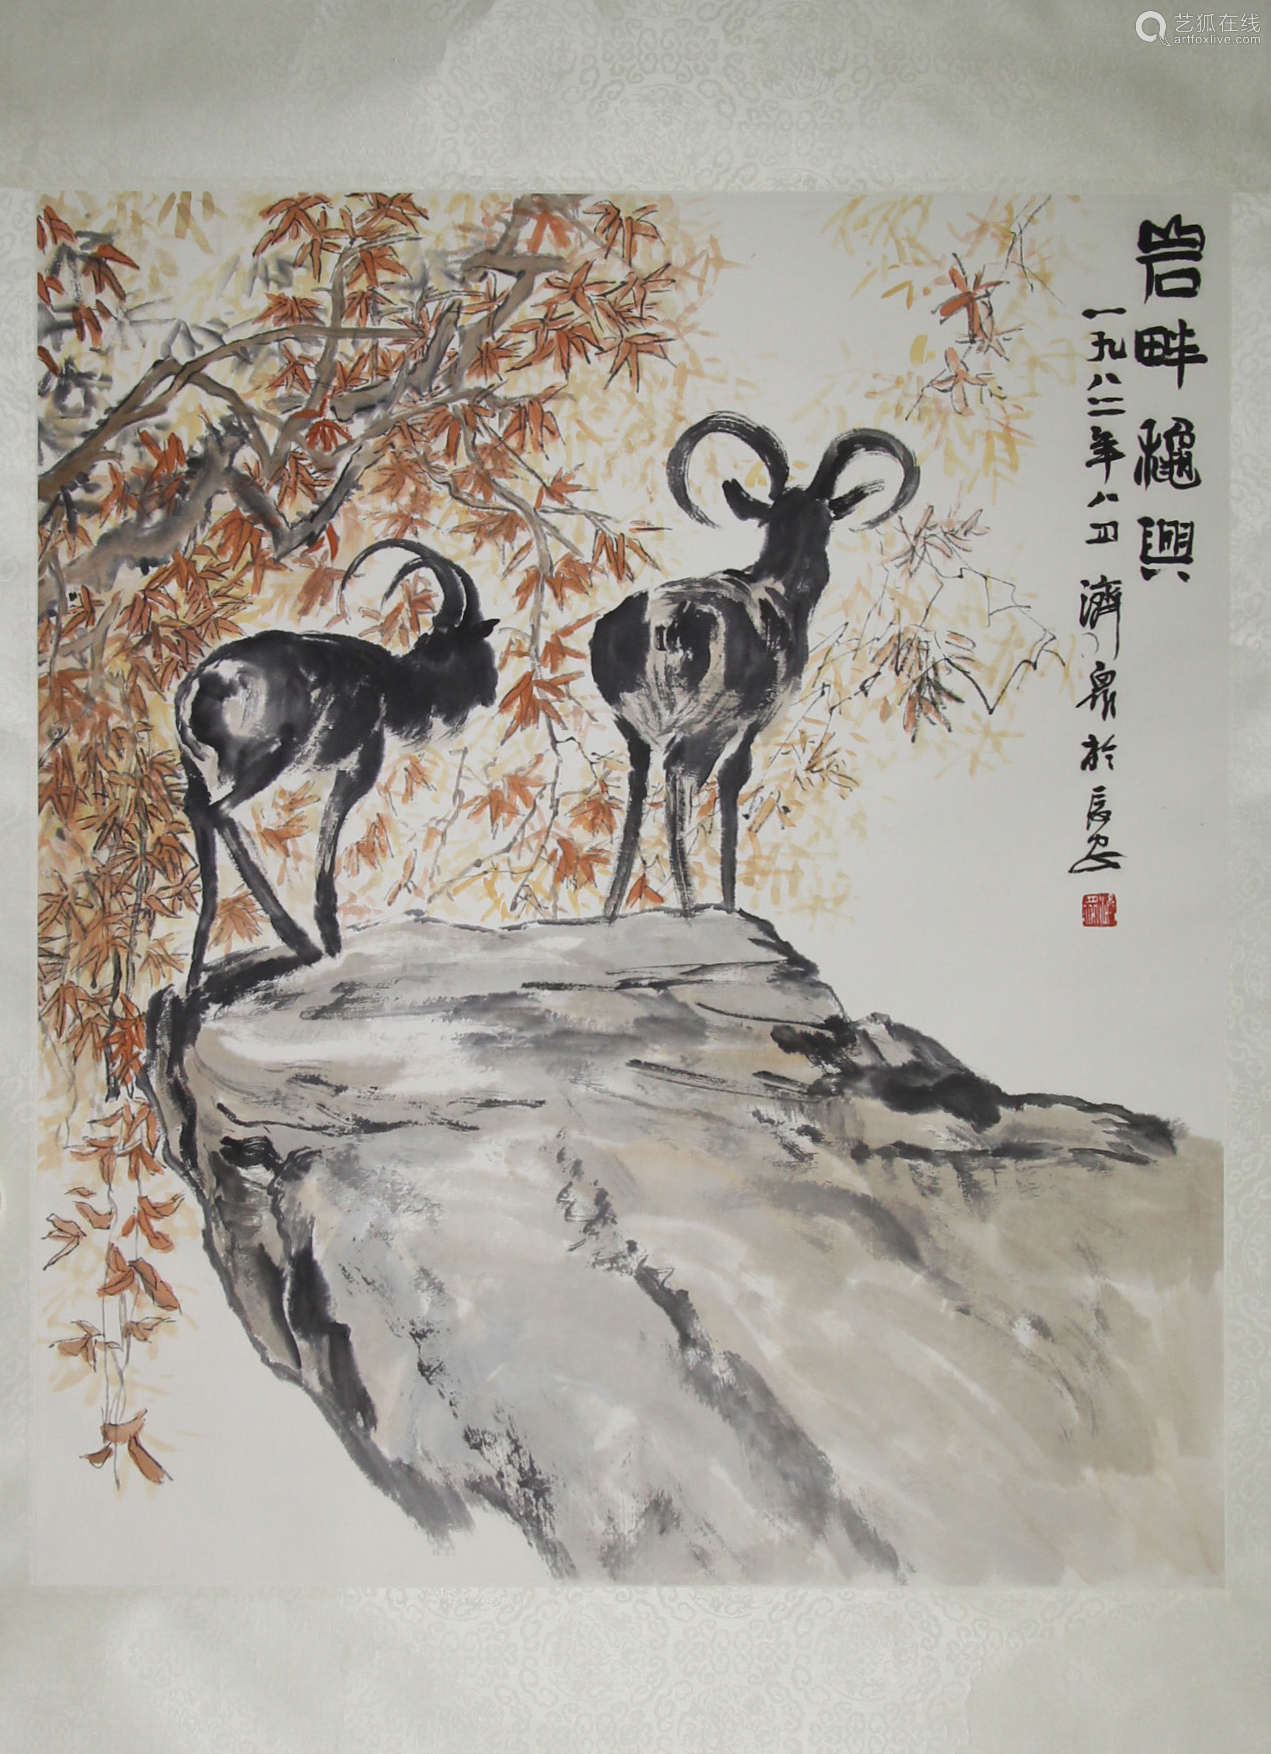 Chinese ink painting,
Fang Jiquan's 